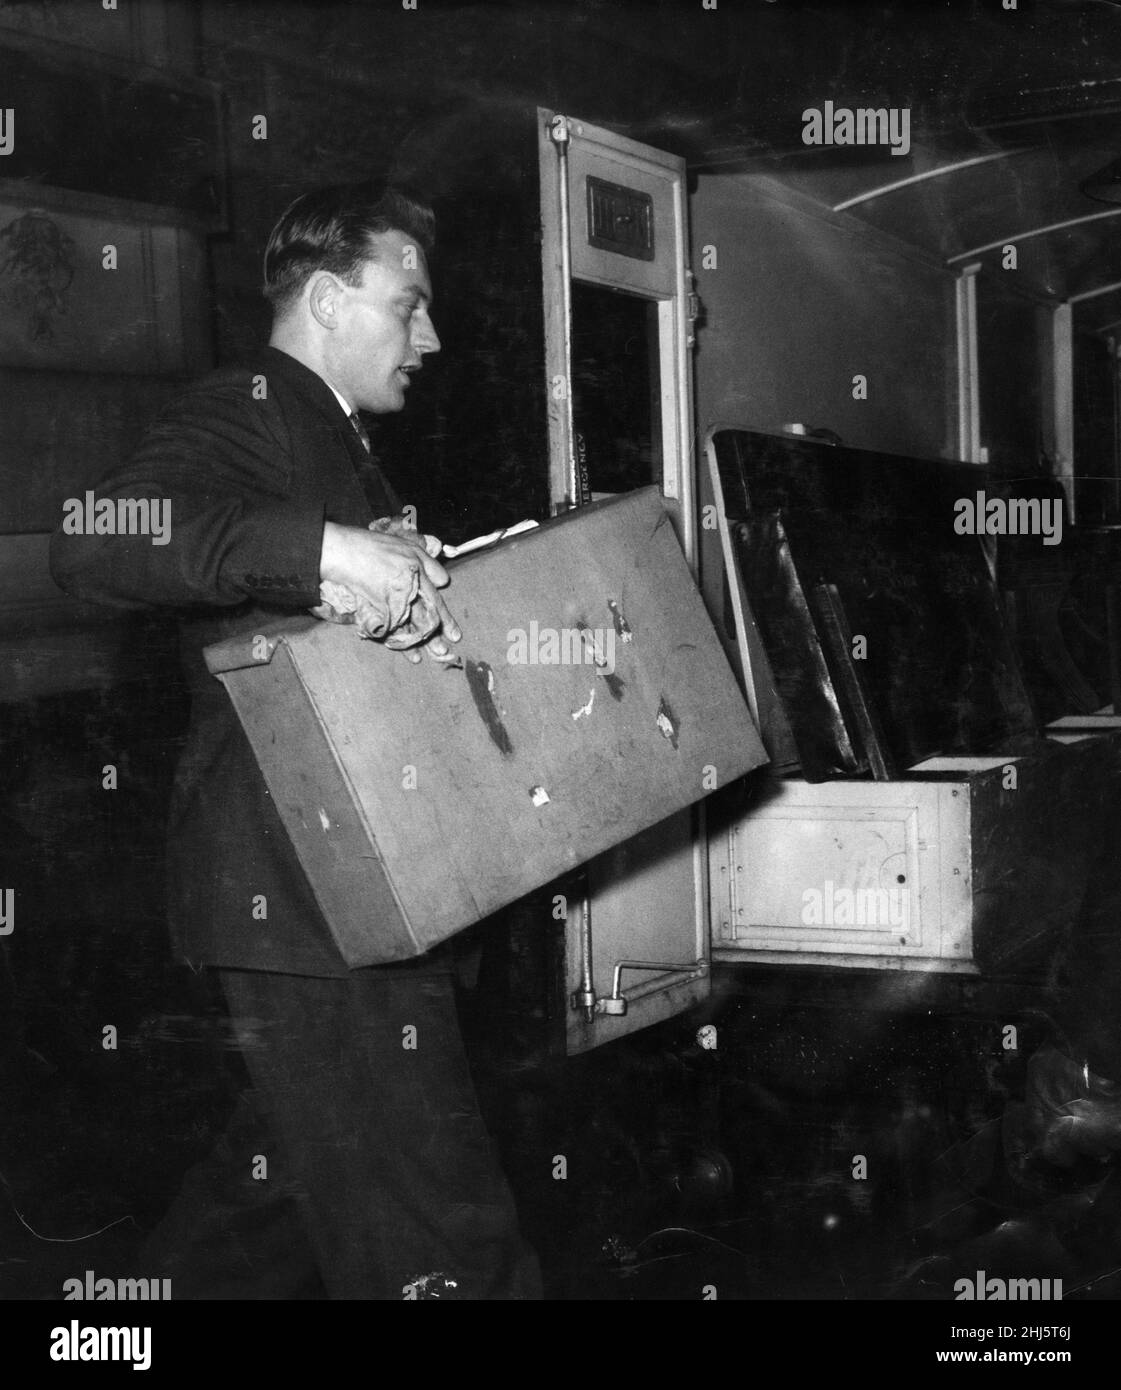 The Five Pound Note Forgery Crime of 1957. Picture shows a policeman with a suitcase full of the forged five pound notes used as evidence at The Old Bailey.  Mr George Morgan, 37, a car dealer of Baskerville Road, Wandsworth was found guilty of conspiracy to forge five pound notes and of possessing 540 forged notes.  He was jailed for eight years in January 1958. The first man to be tried for the crime was Albert Small who was jailed in December 1957.   A total of 5 people was tried at The Old Bailey in connection with the forging and printing of five pound notes and circulating them.  Picture Stock Photo